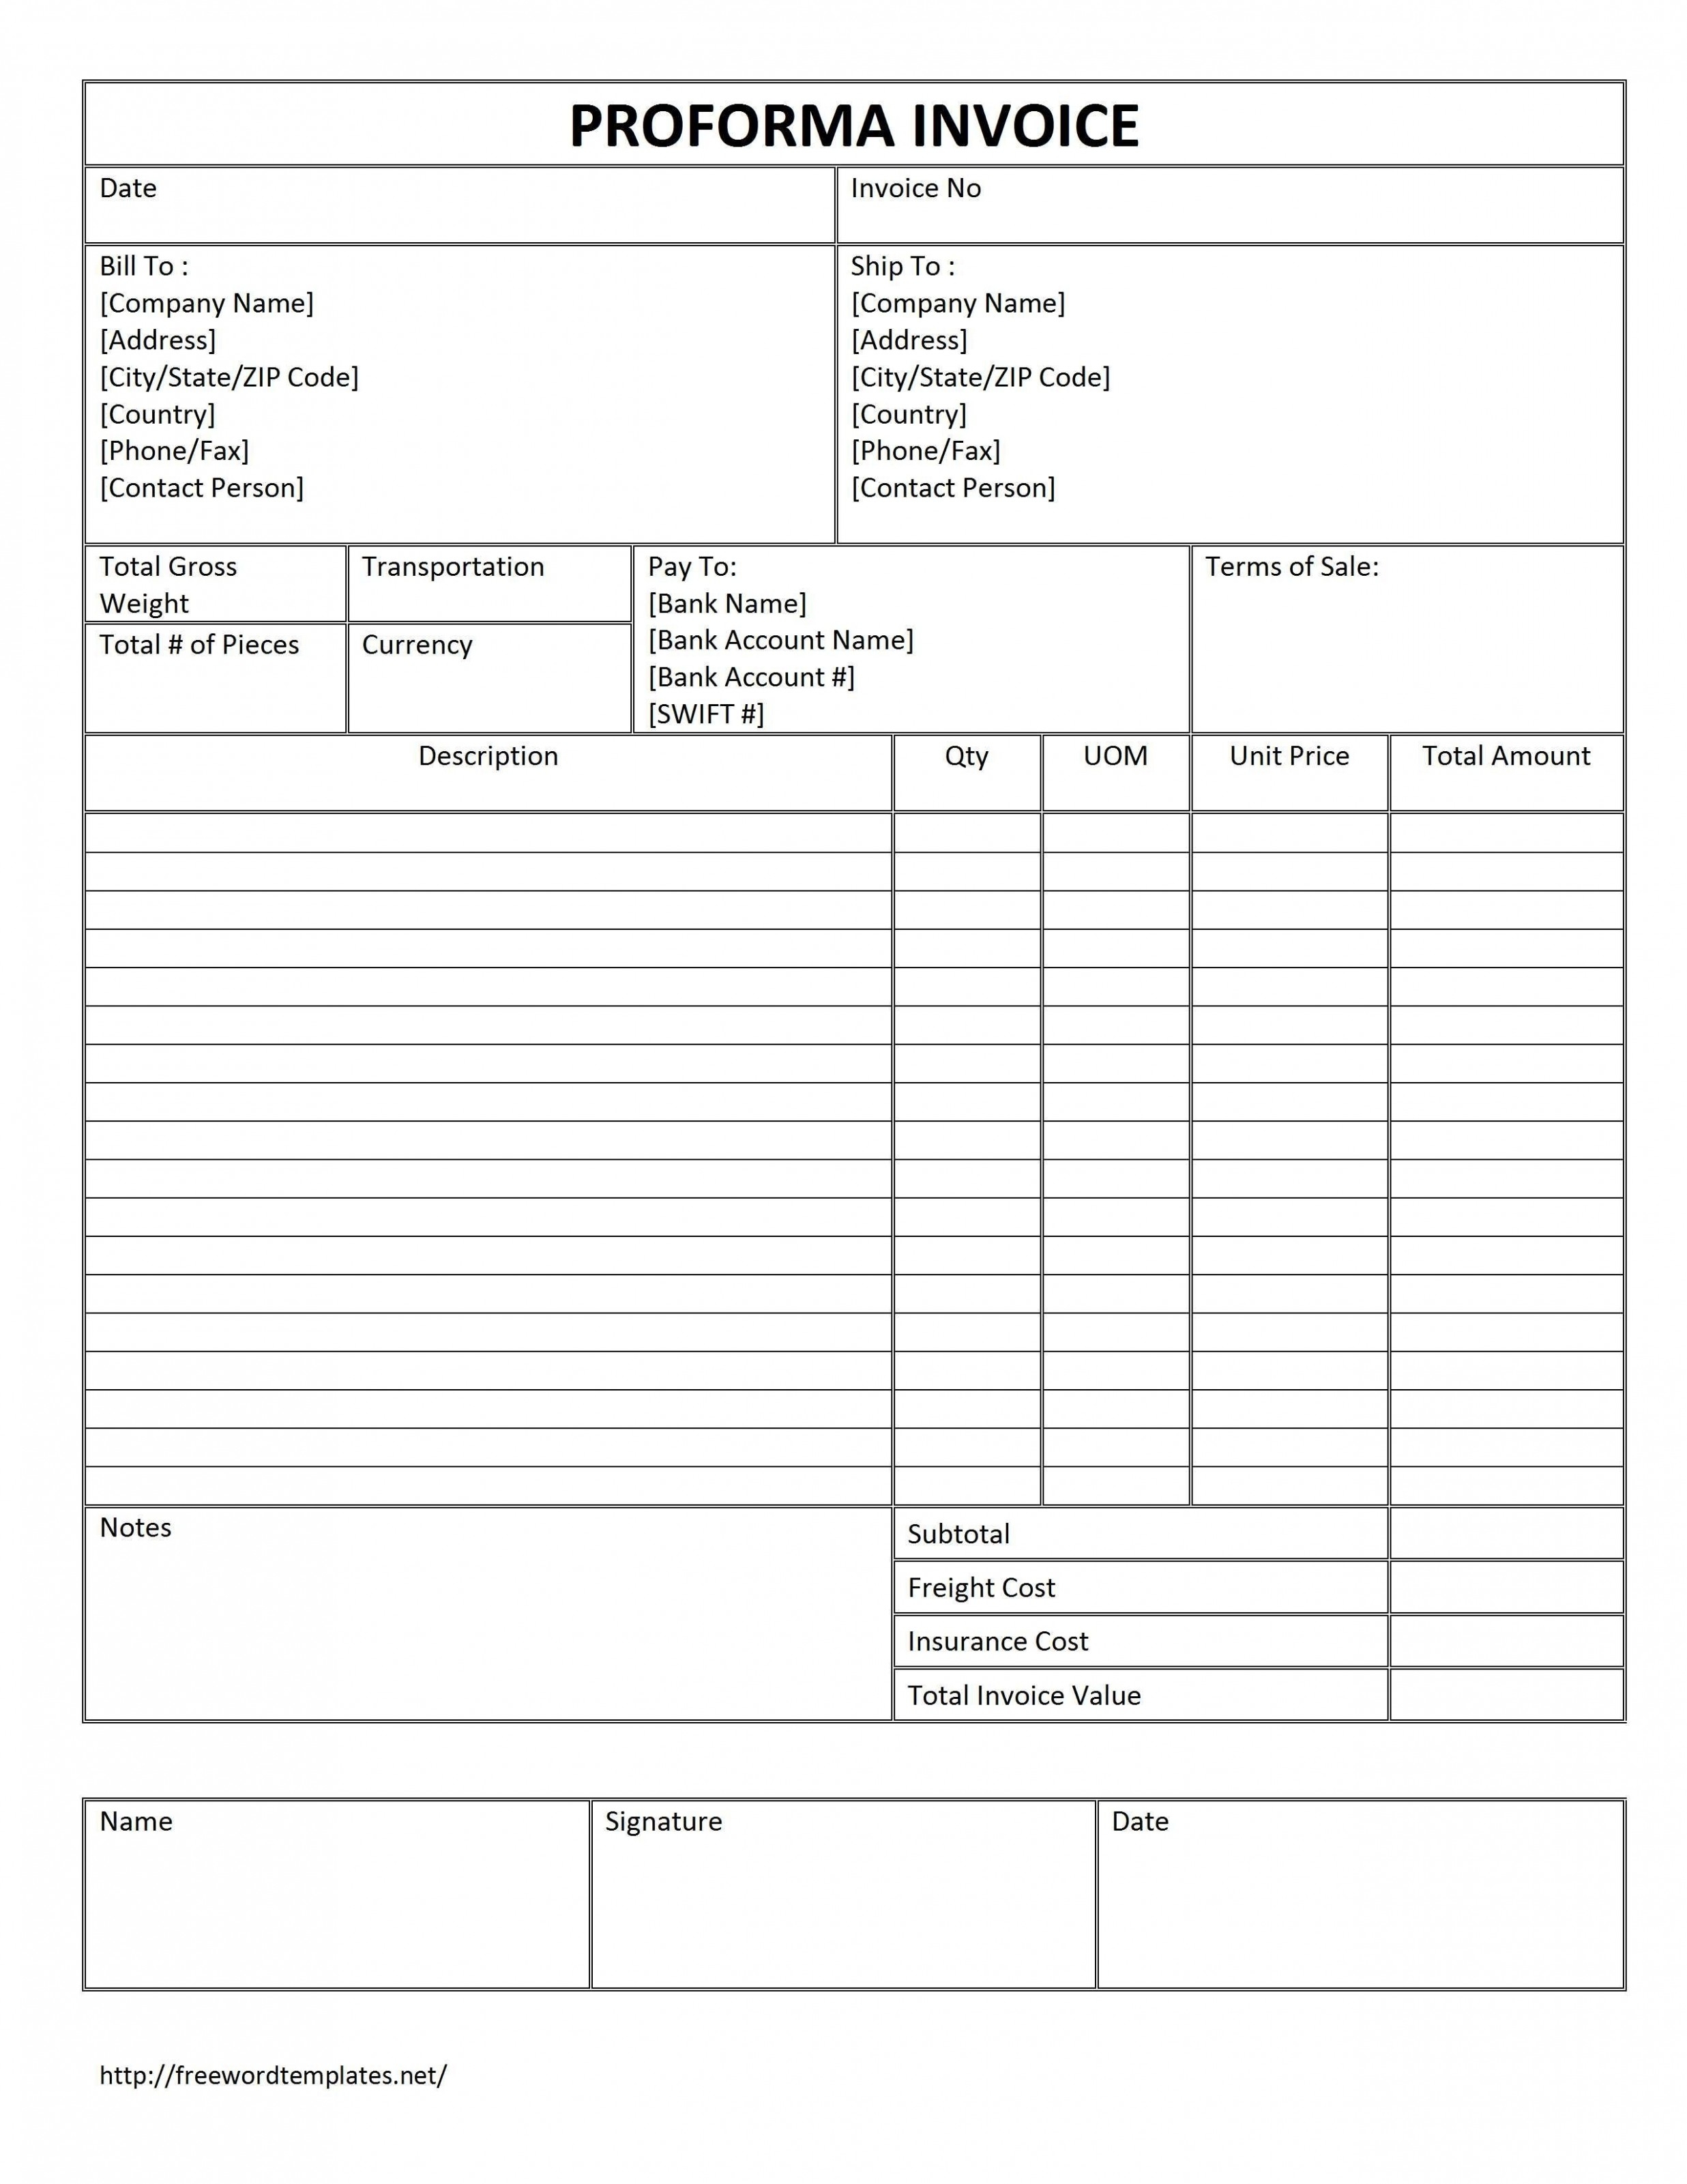 invoice format for advance payment invoice template proforma invoice for 50 advance payment